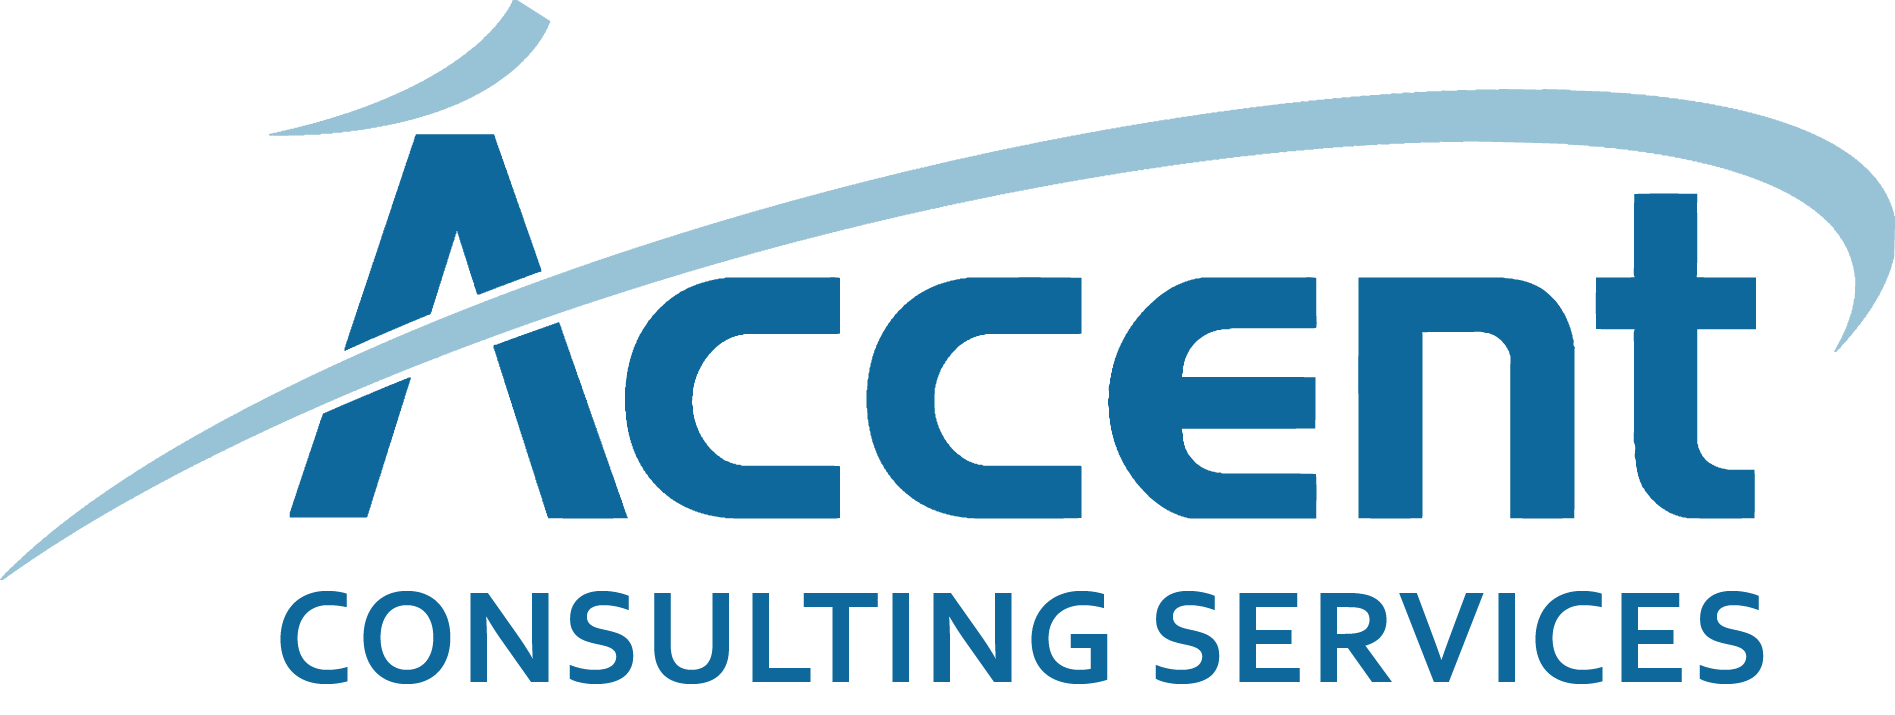 Accent Consulting Founded